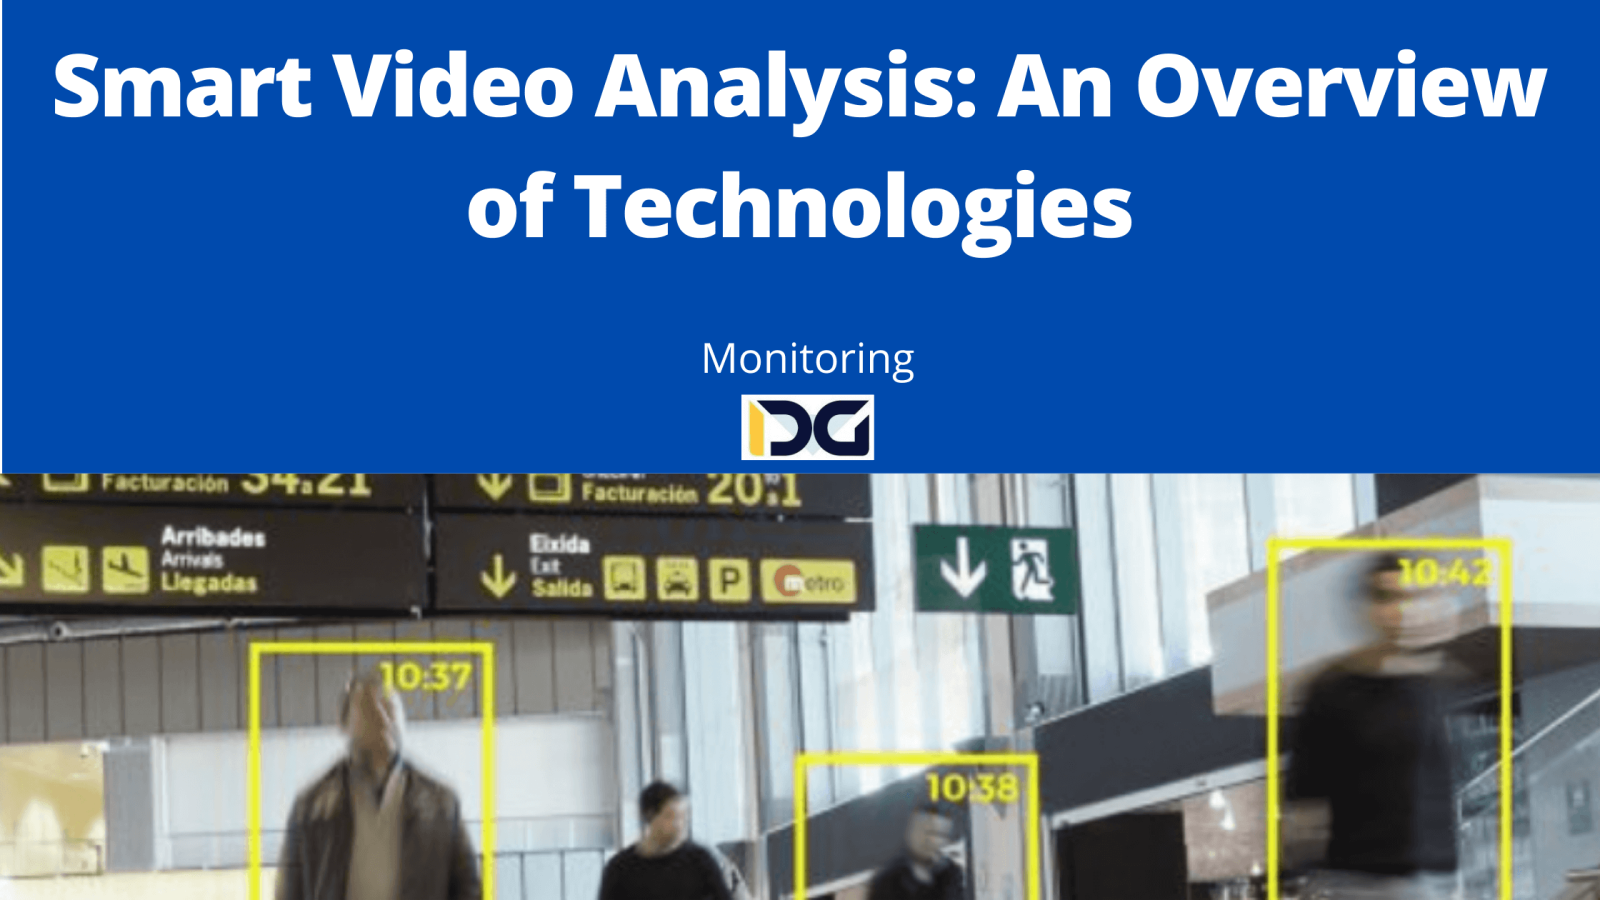 Smart Video Analysis: An Overview of Technologies